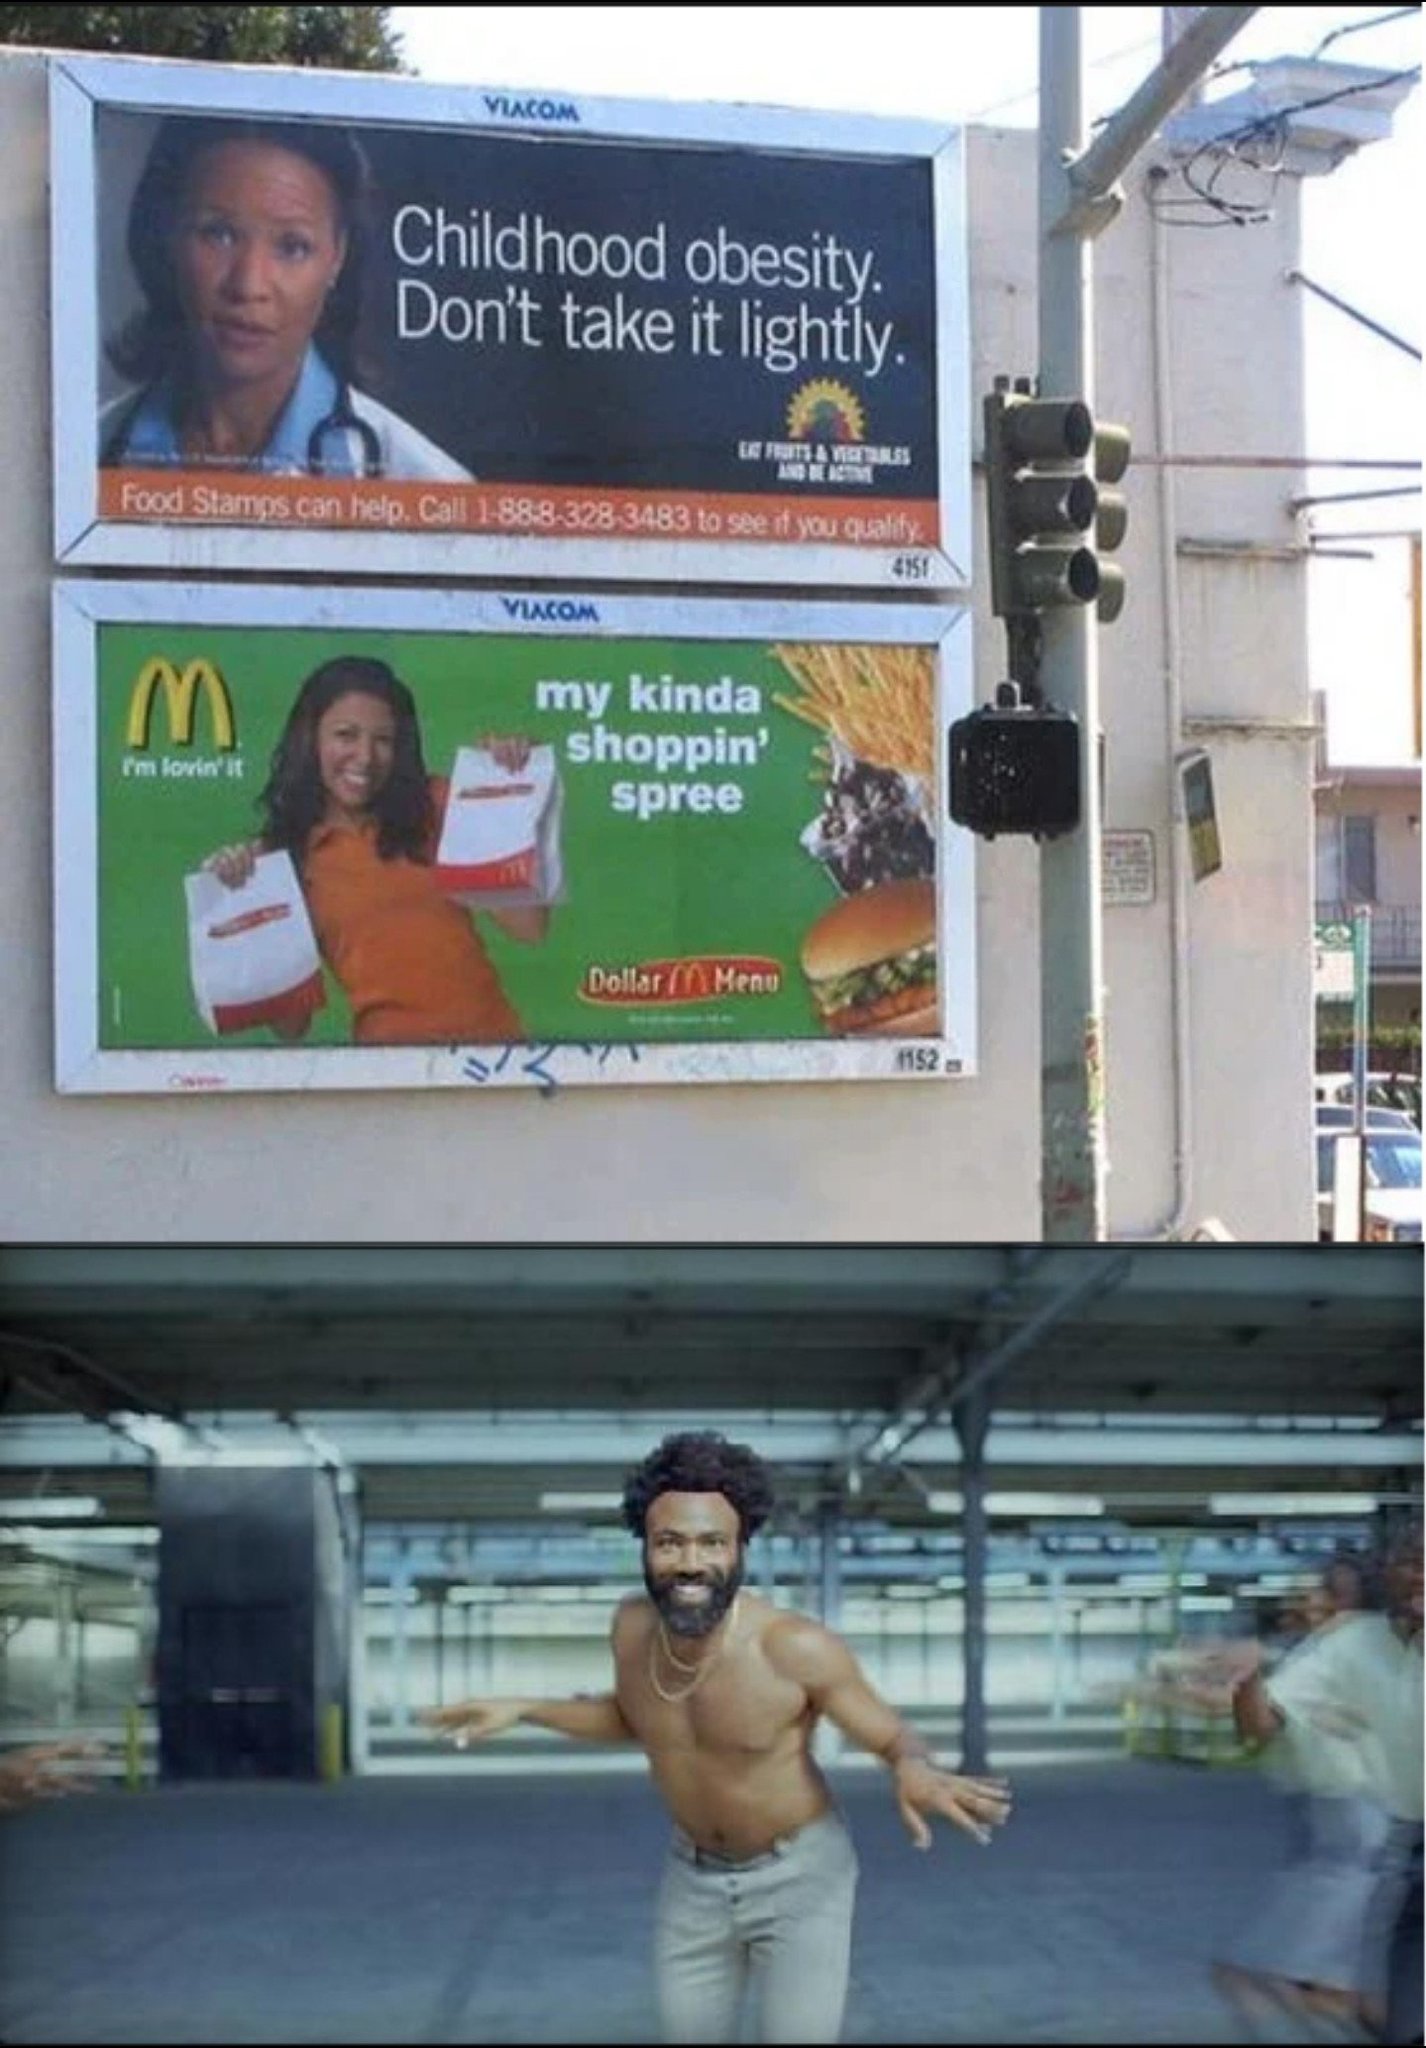 Looks like the same woman in both adverts - meme